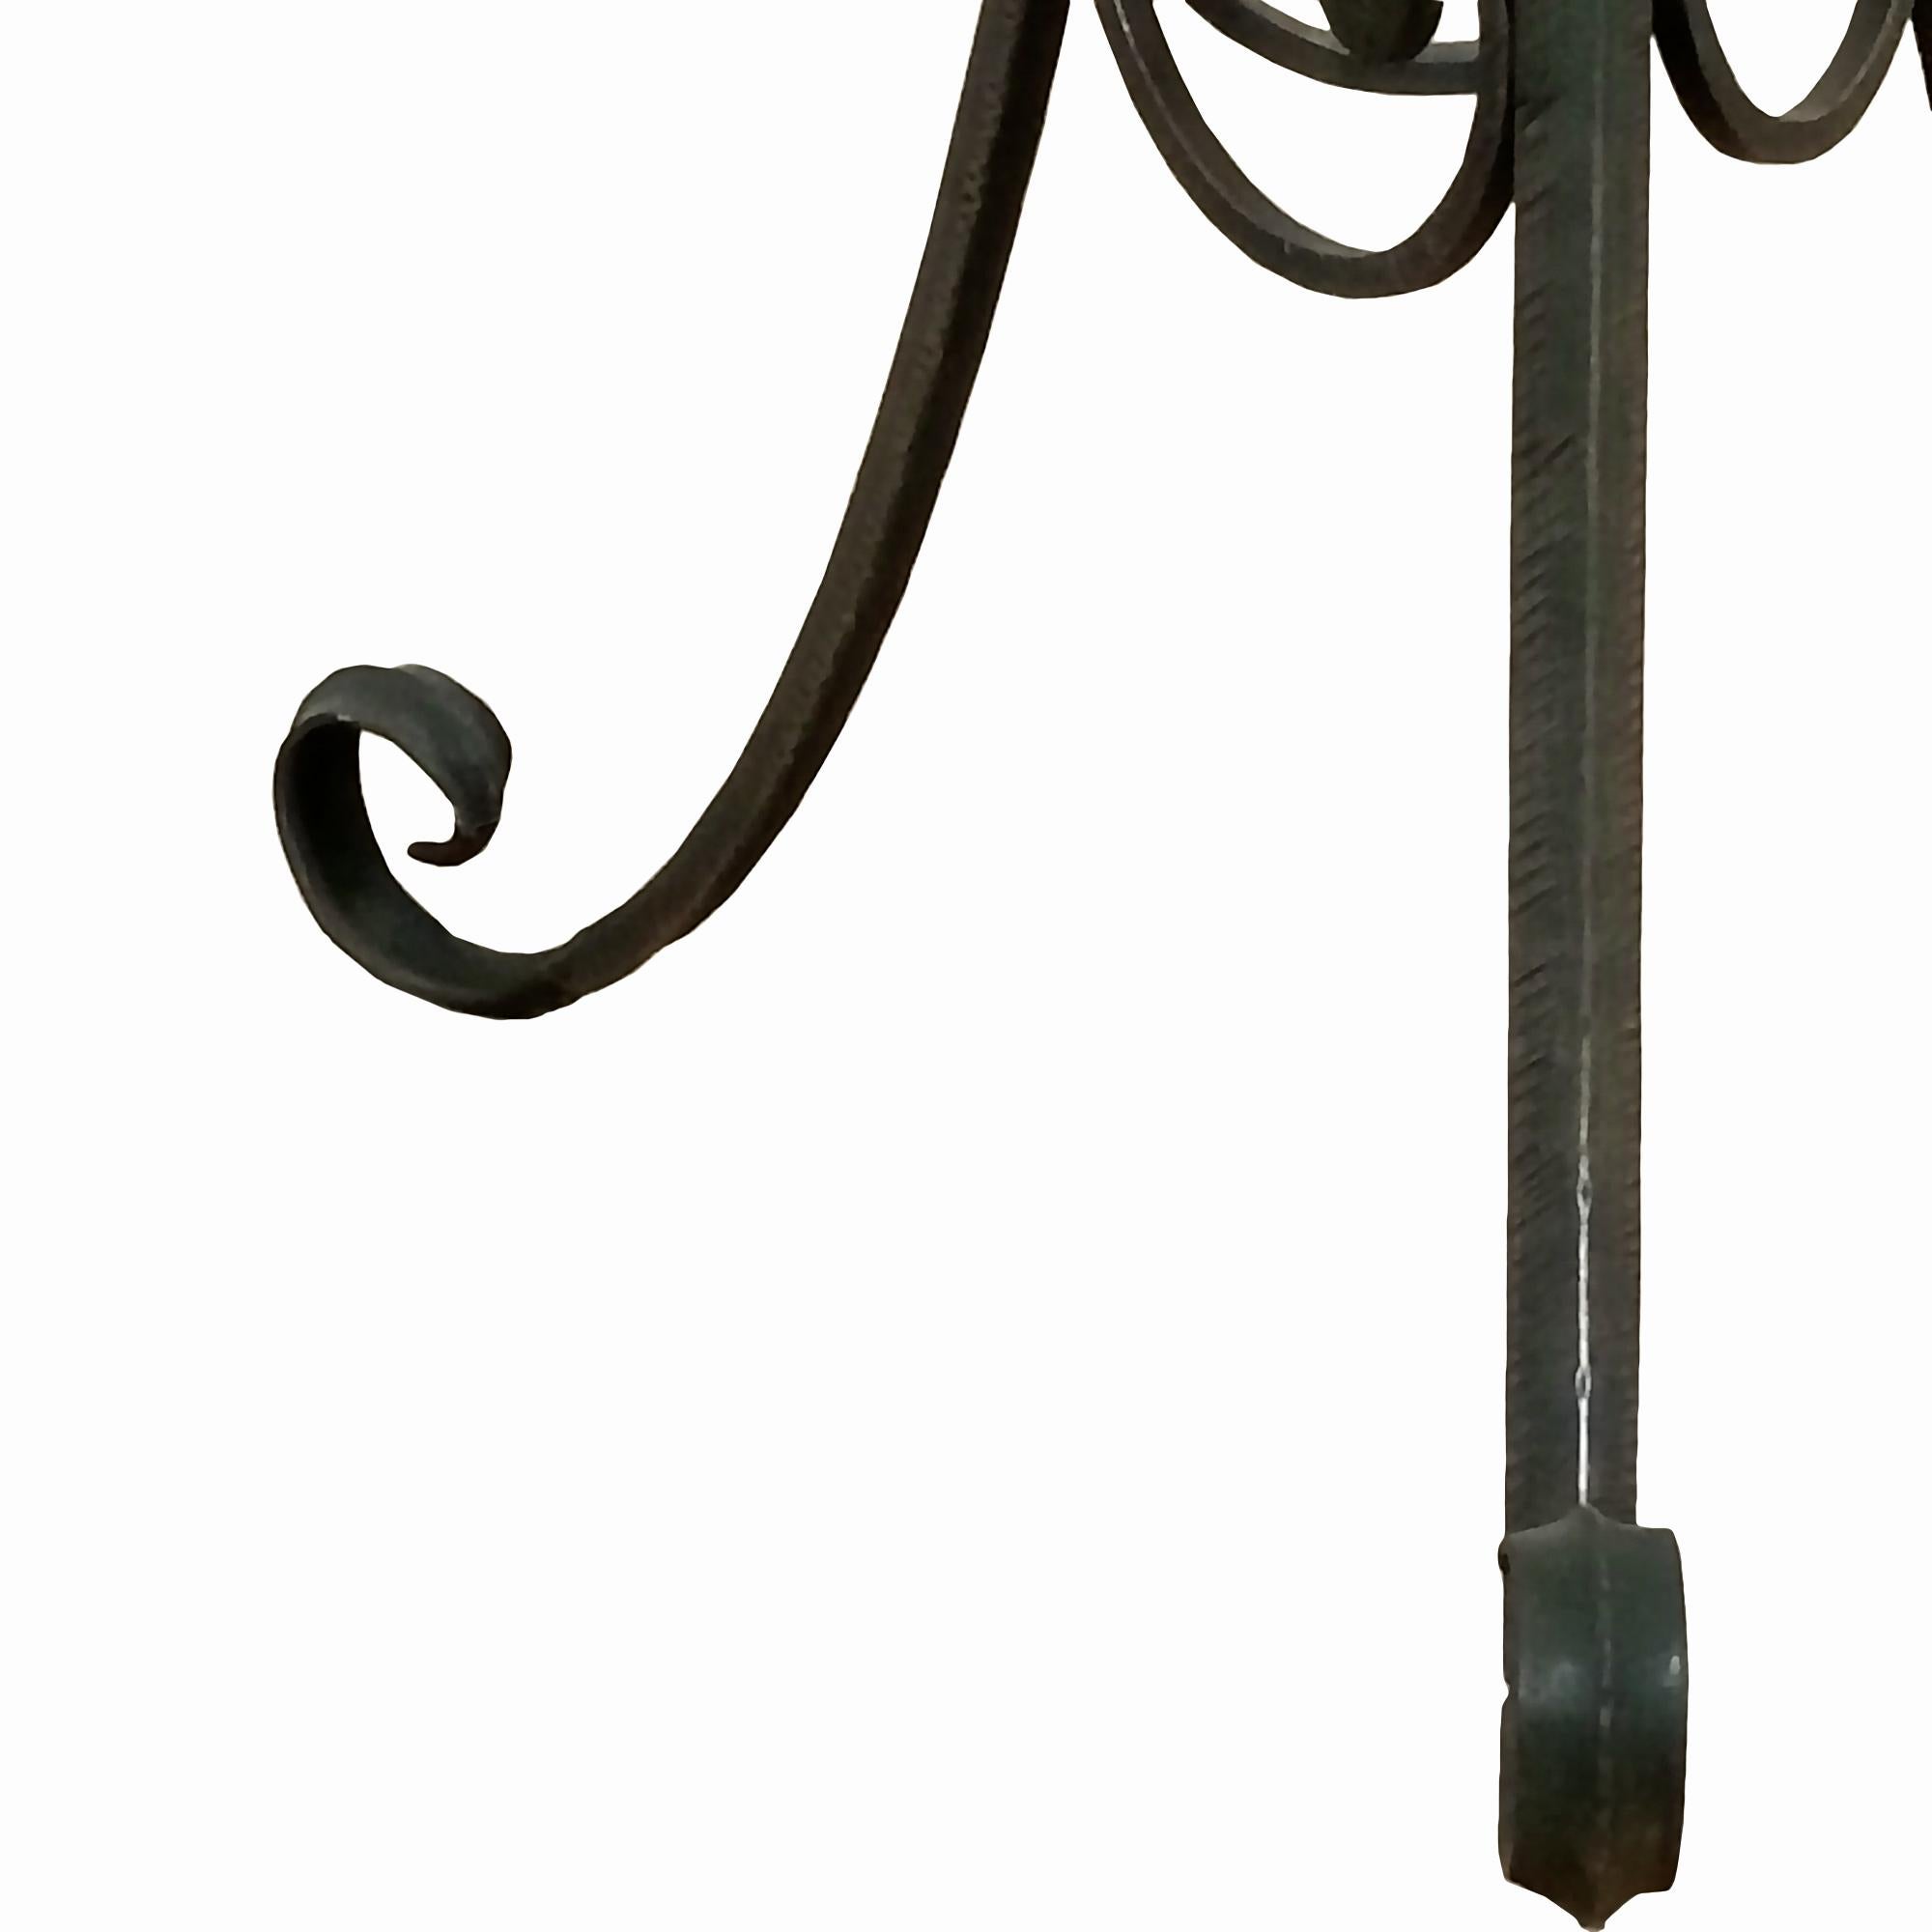 Art Deco Standing Lamp, Wrought Iron with New Lampshade, France, 1920 For Sale 1